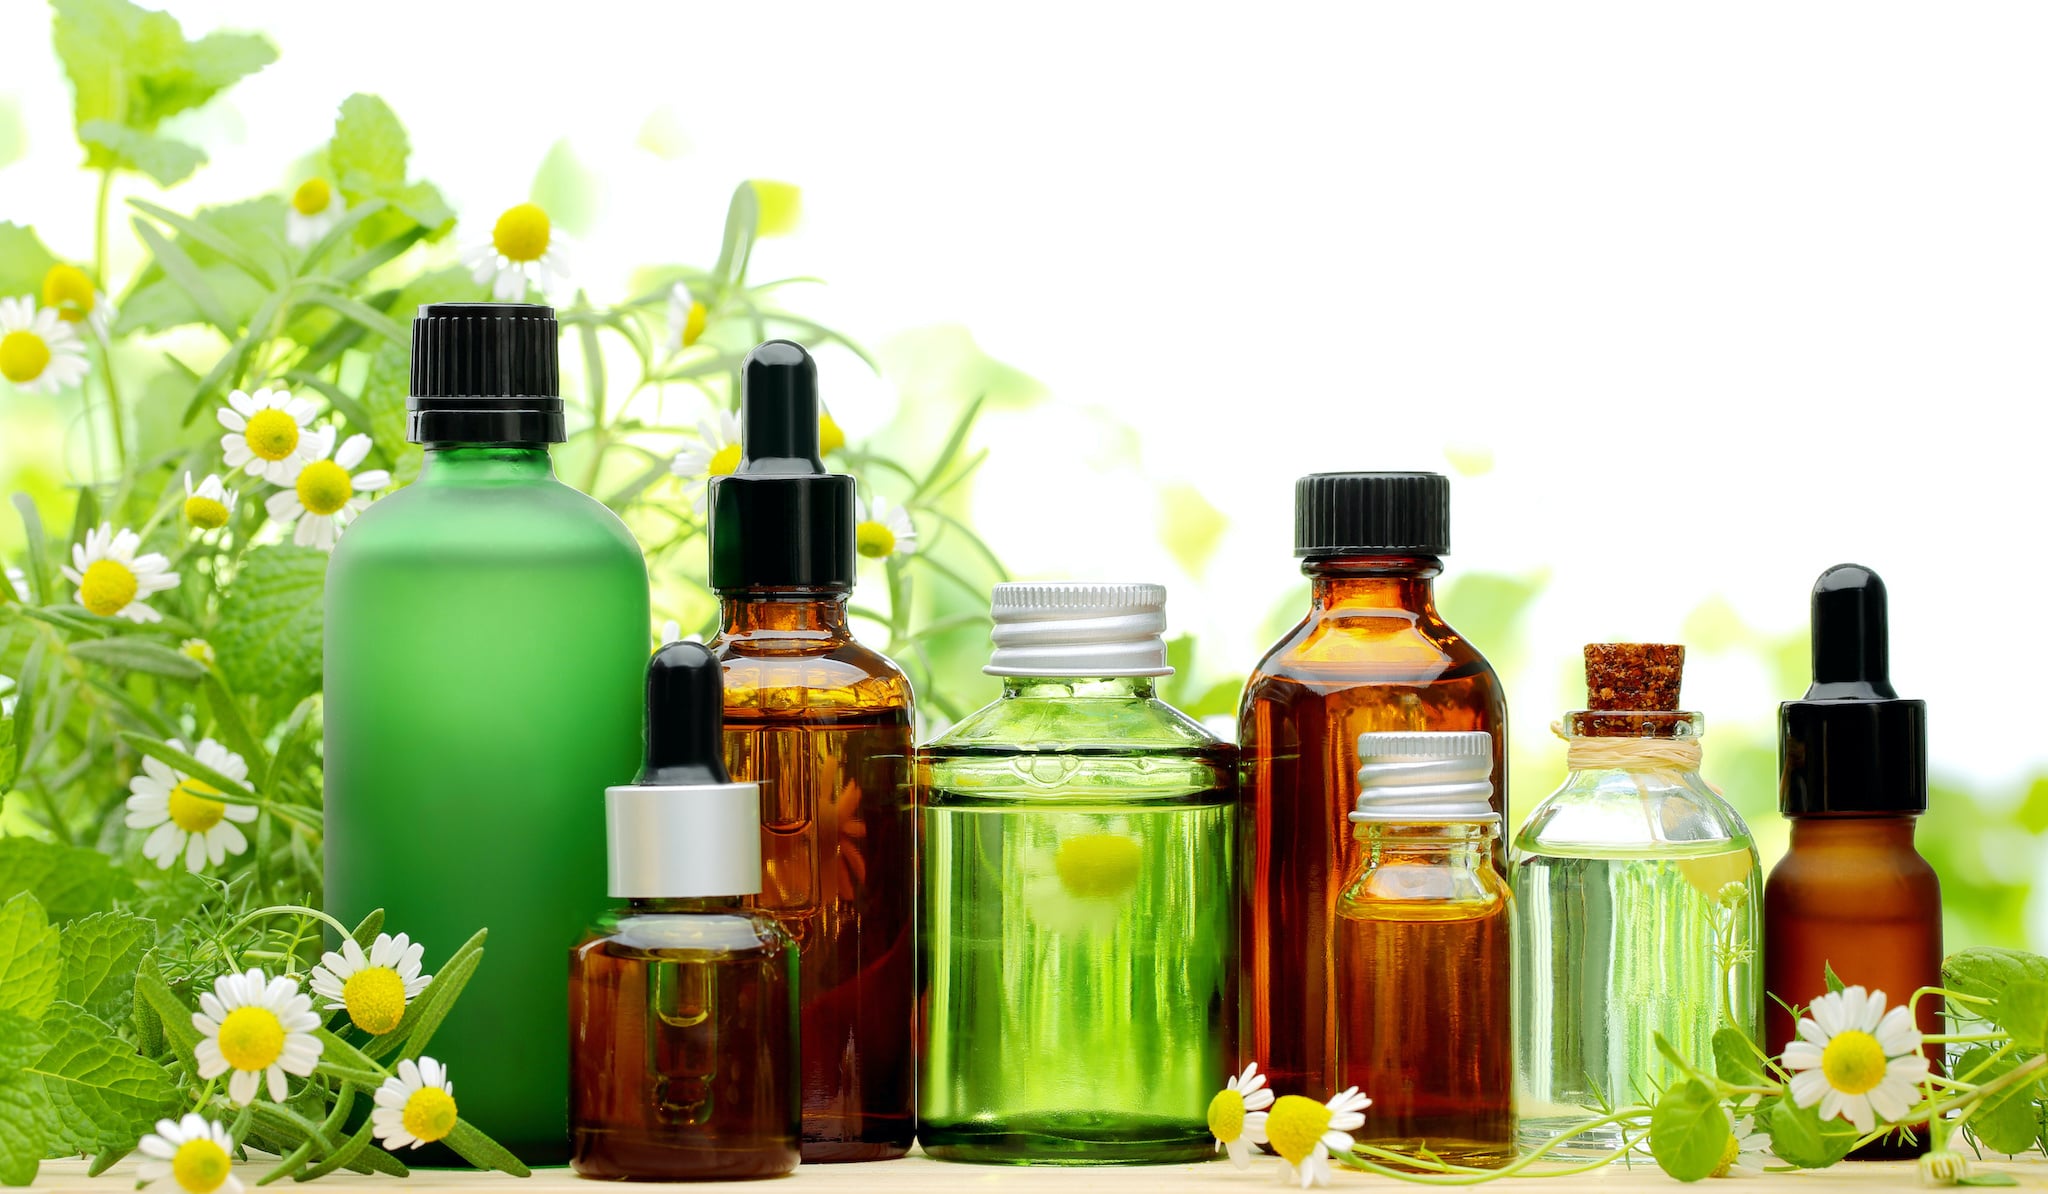 Aromatherapy bottles of essential oils